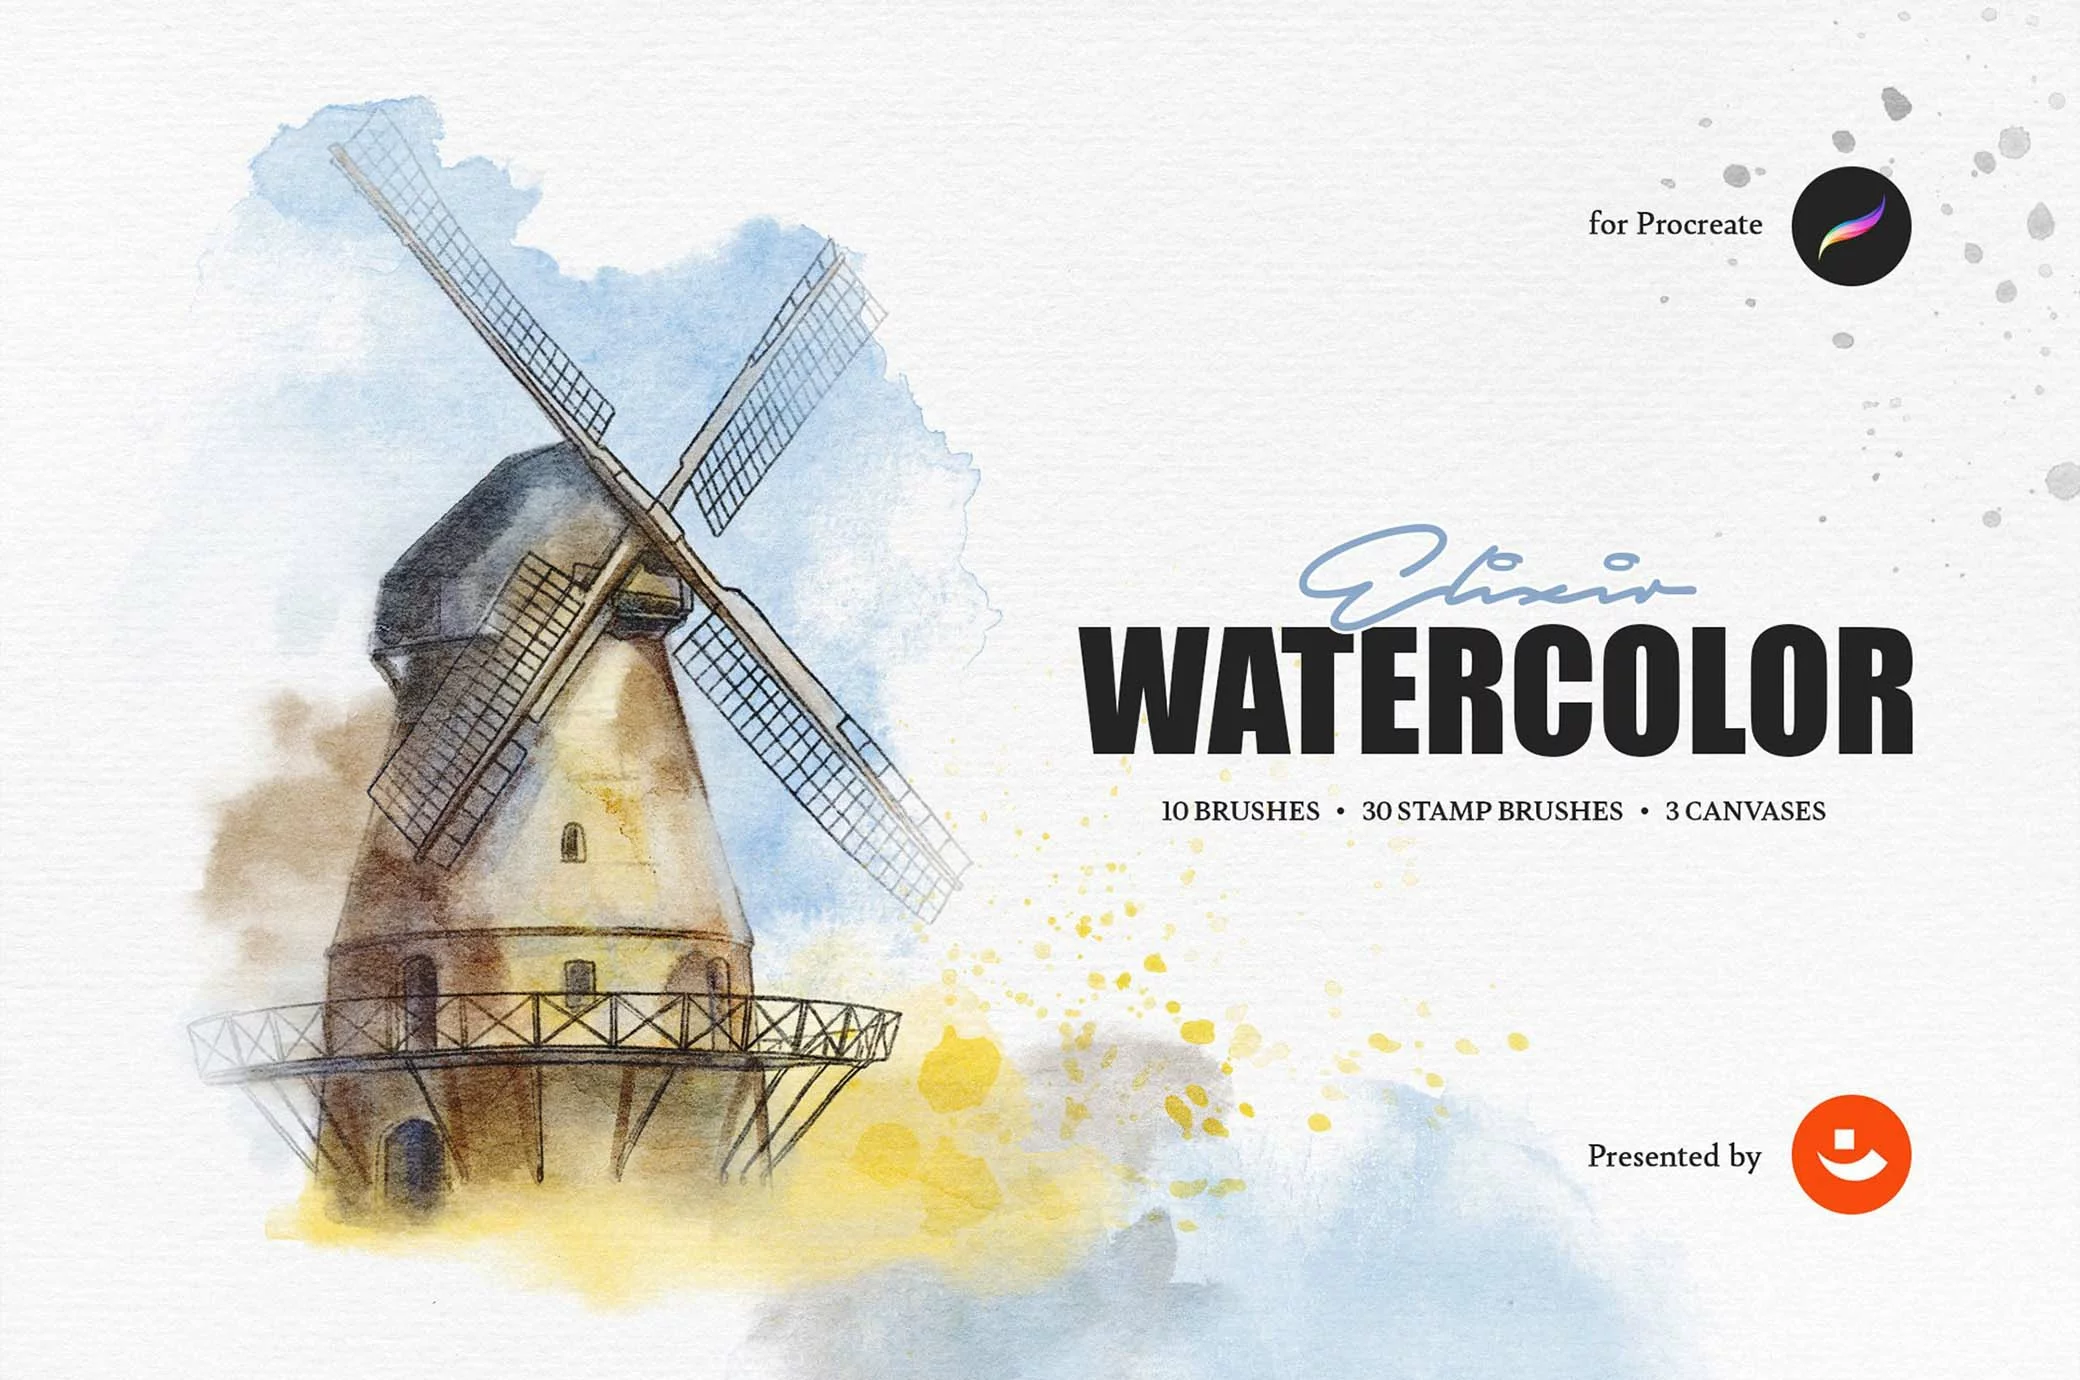 SKETCHING WATERCOLOR PROCREATE BRUSHES